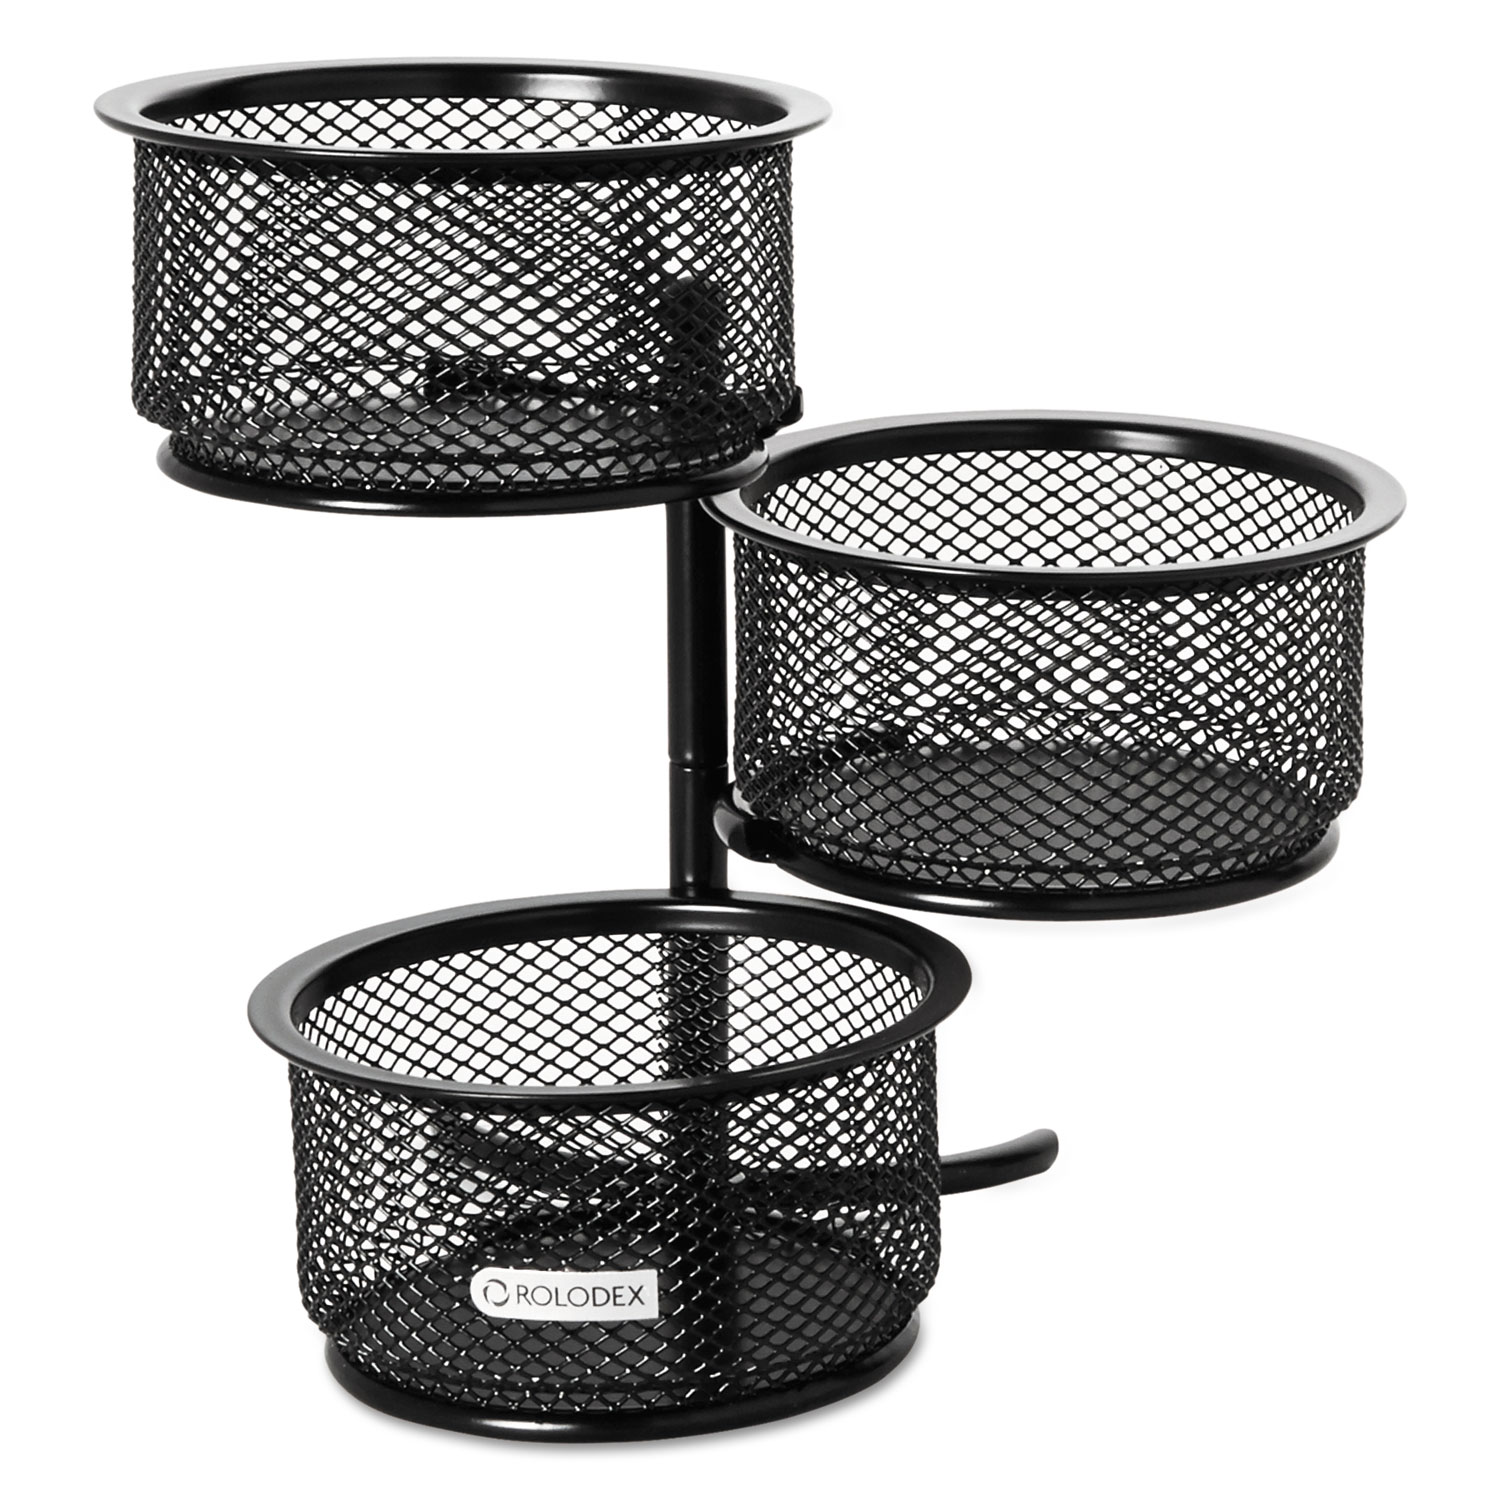  Rolodex 62533 3 Tier Wire Mesh Swivel Tower Paper Clip Holder, 3 3/4 x 6 1/2 x 6, Black (ROL62533) 